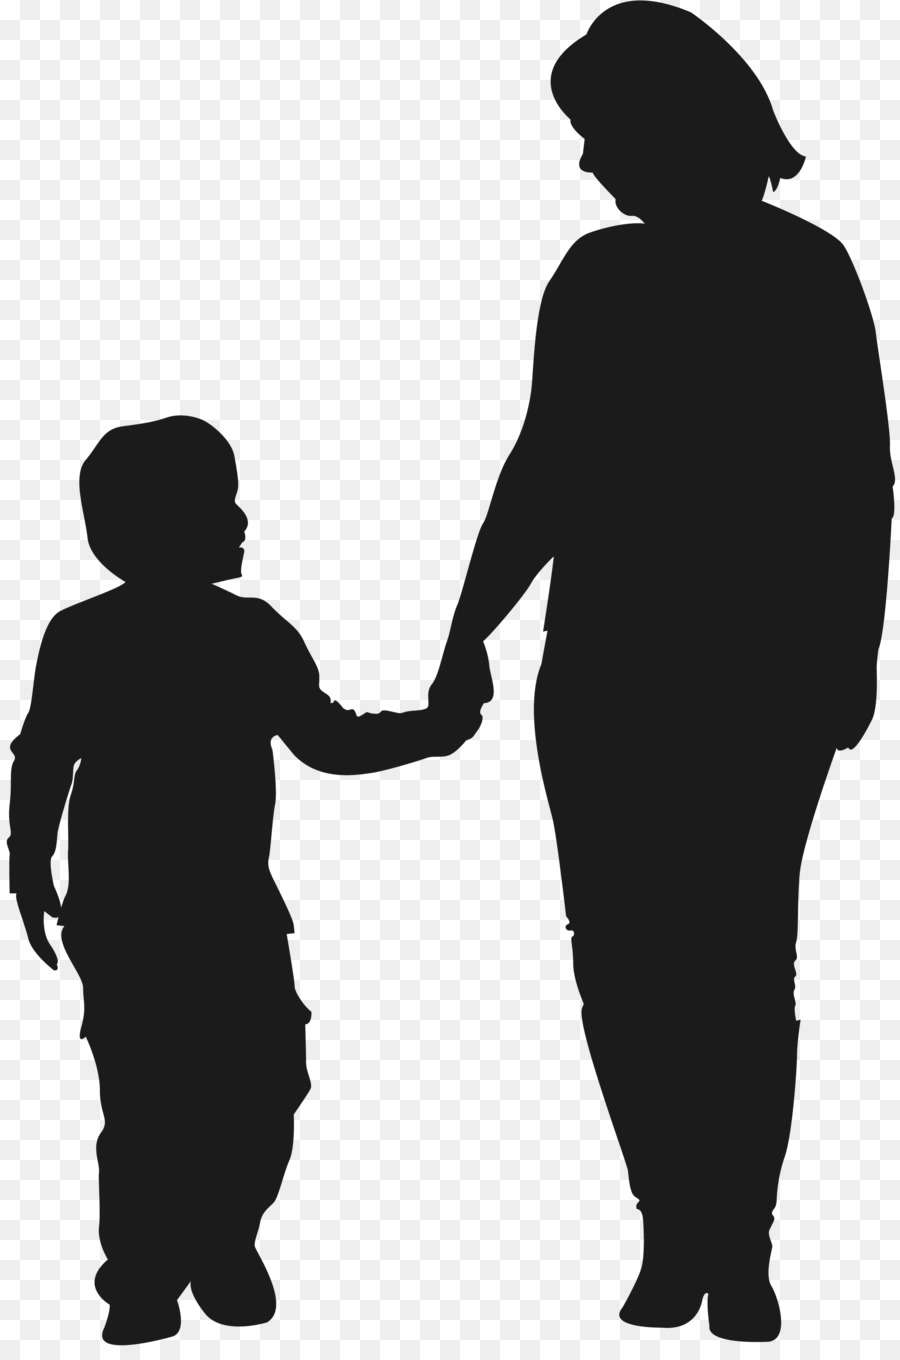 Mother Child Silhouette Son - child png download - 2560*3840 - Free Transparent Mother png Download.